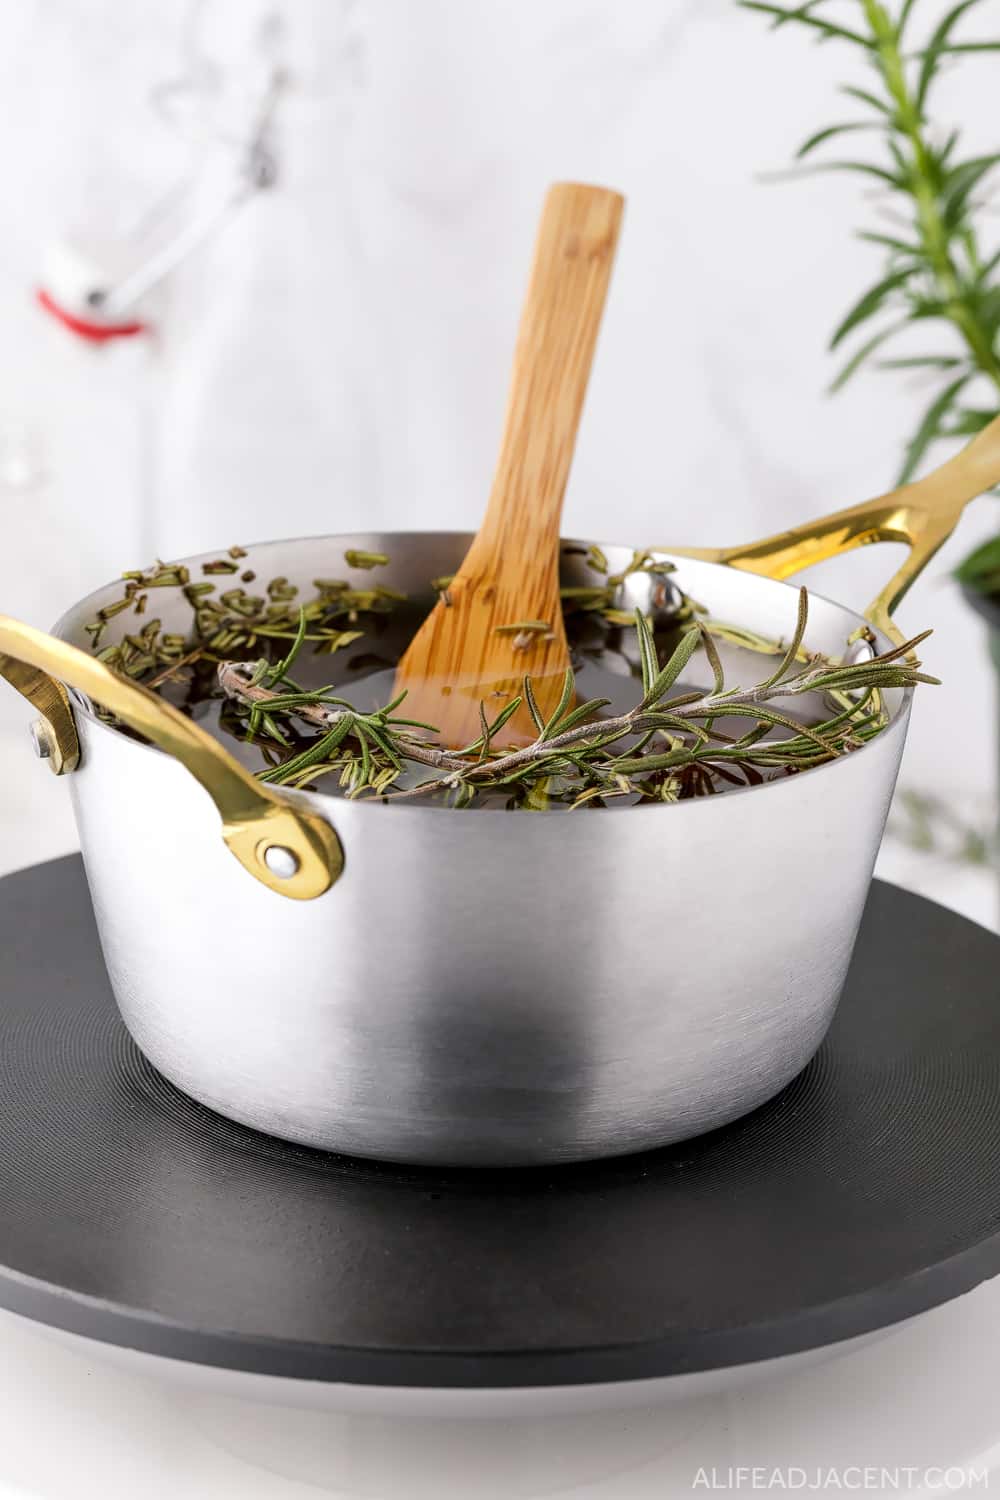 Rosemary Water For Hair Growth – The Ultimate Guide